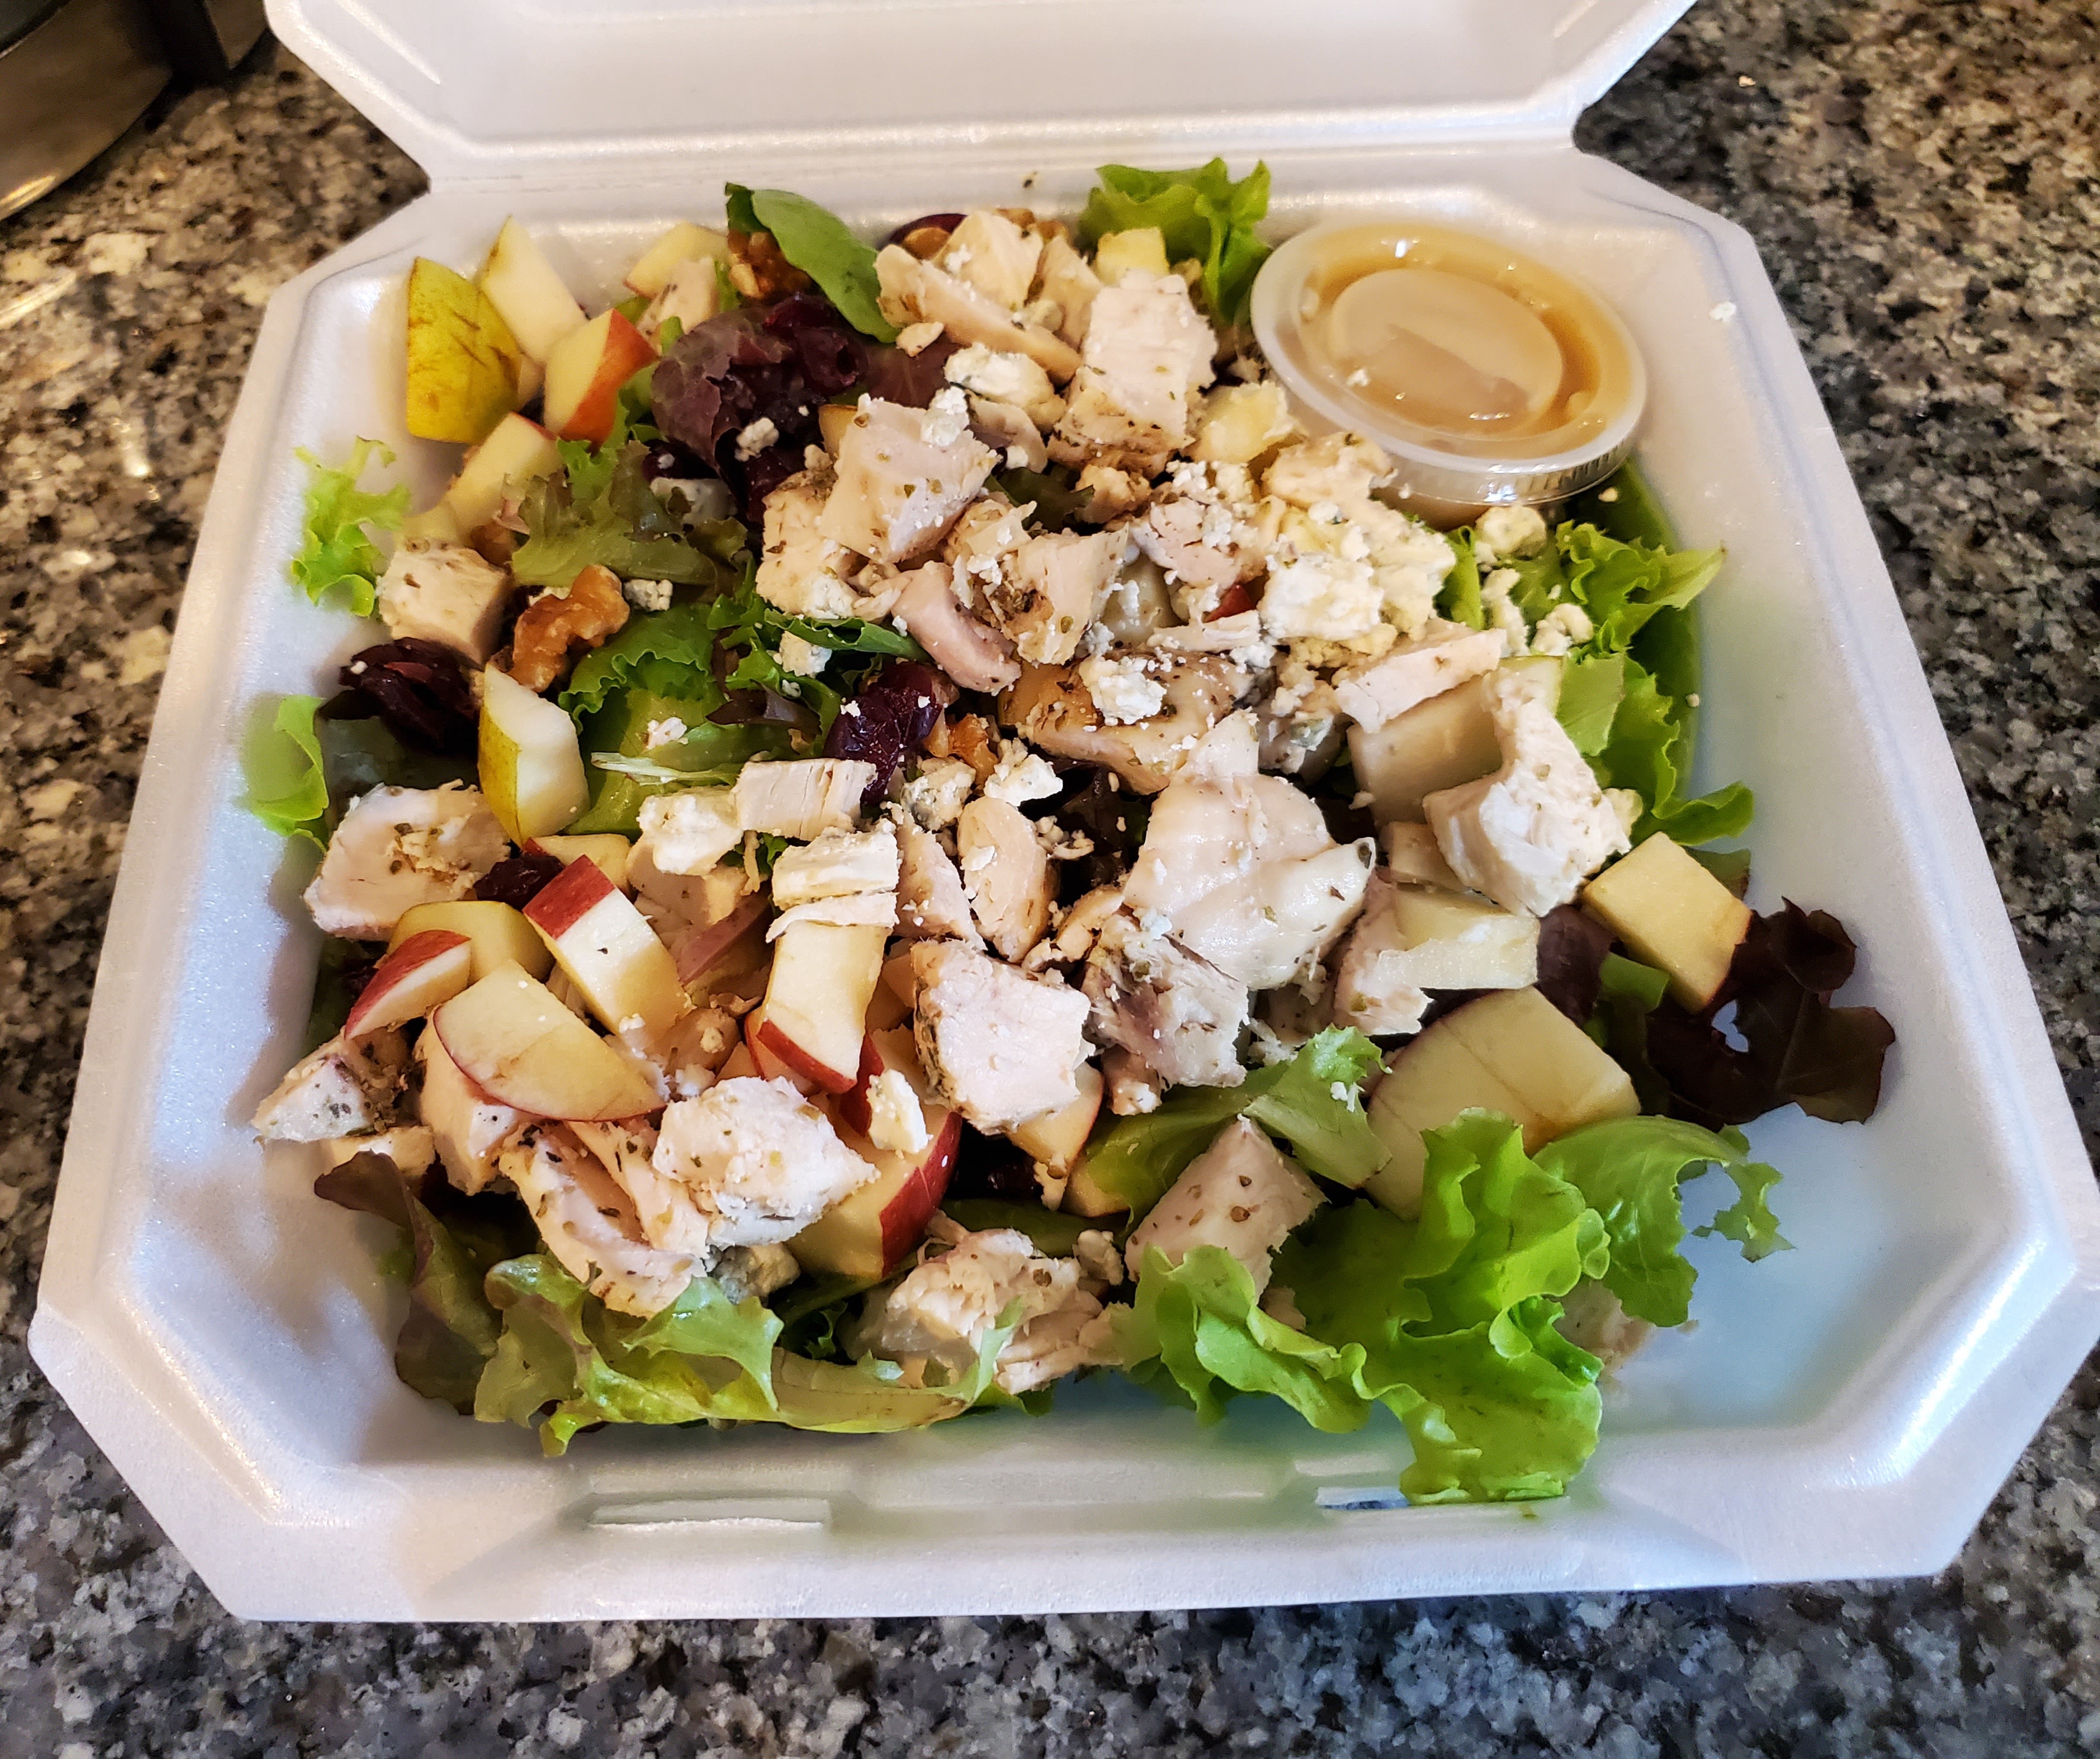 In a styrofoam container, there is a large salad with chicken, cheese, and fruit. Top image by Carl Busch.